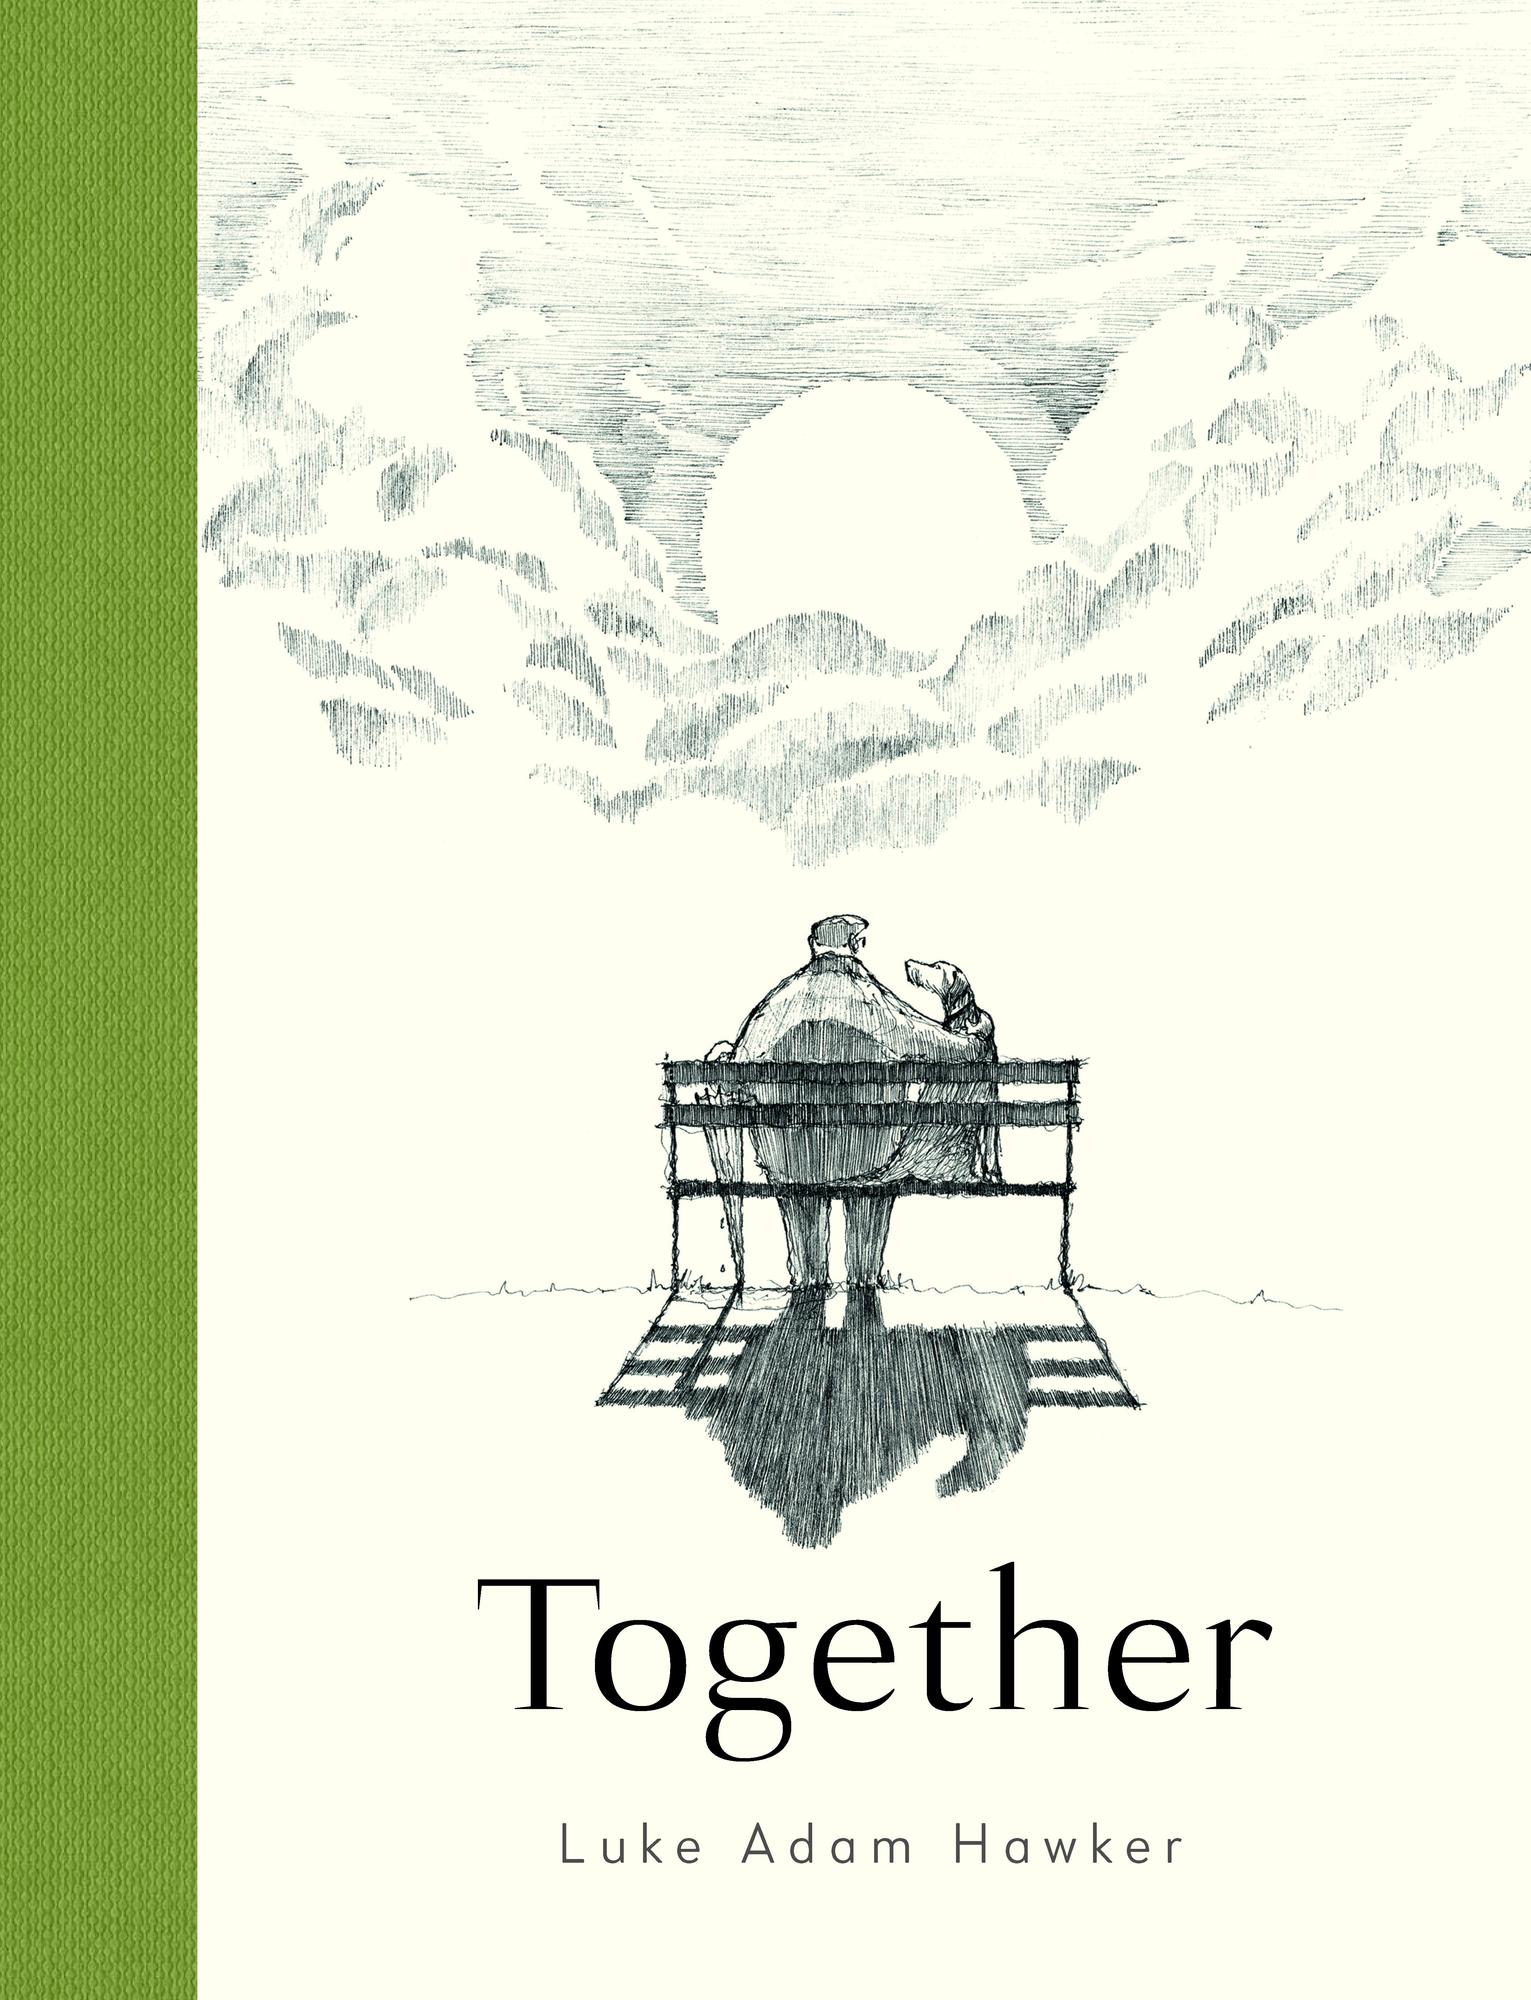 Book review: Together, by Luke Adam Hawker